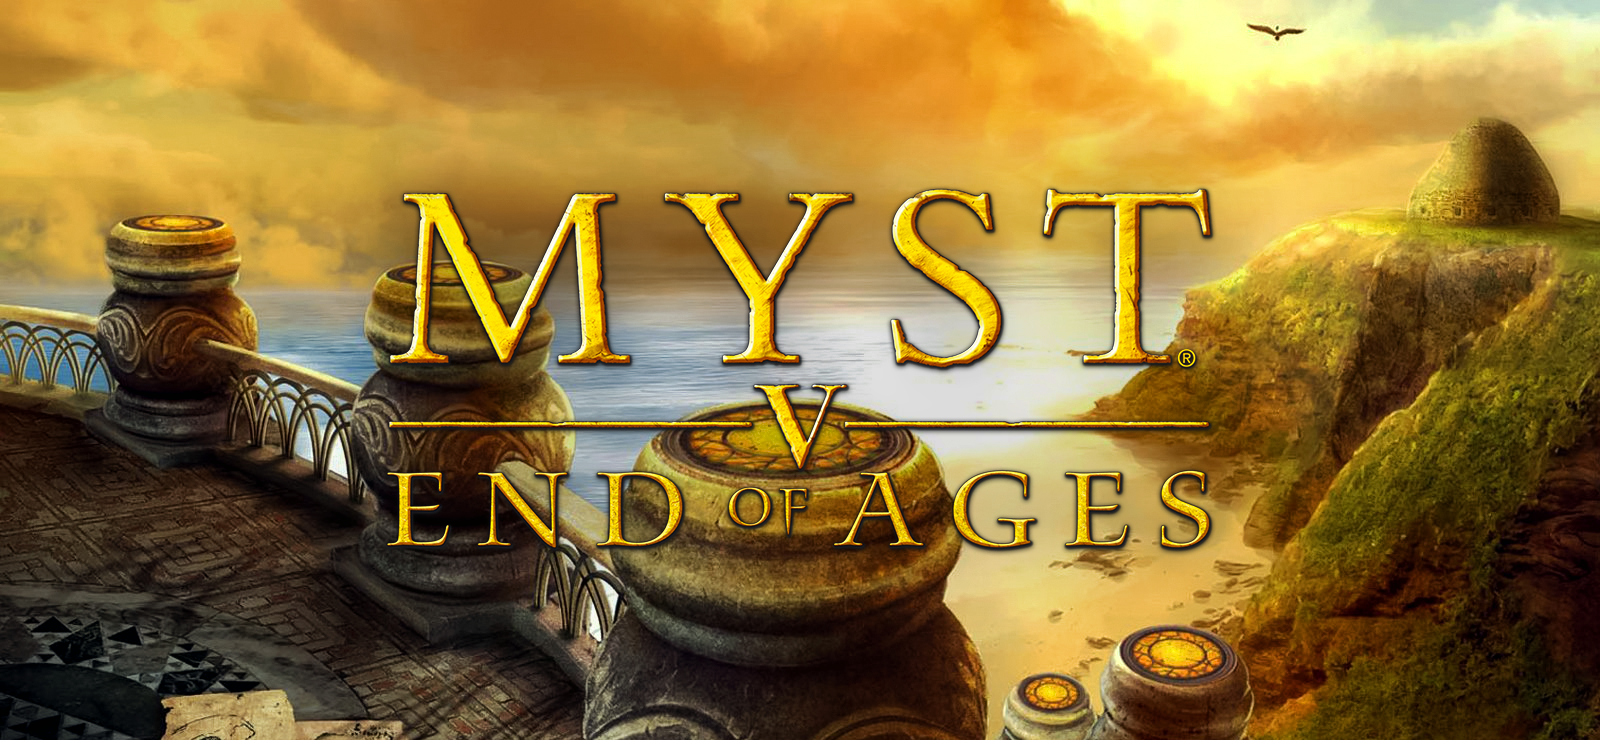 Myst V: End Of Ages Limited Edition